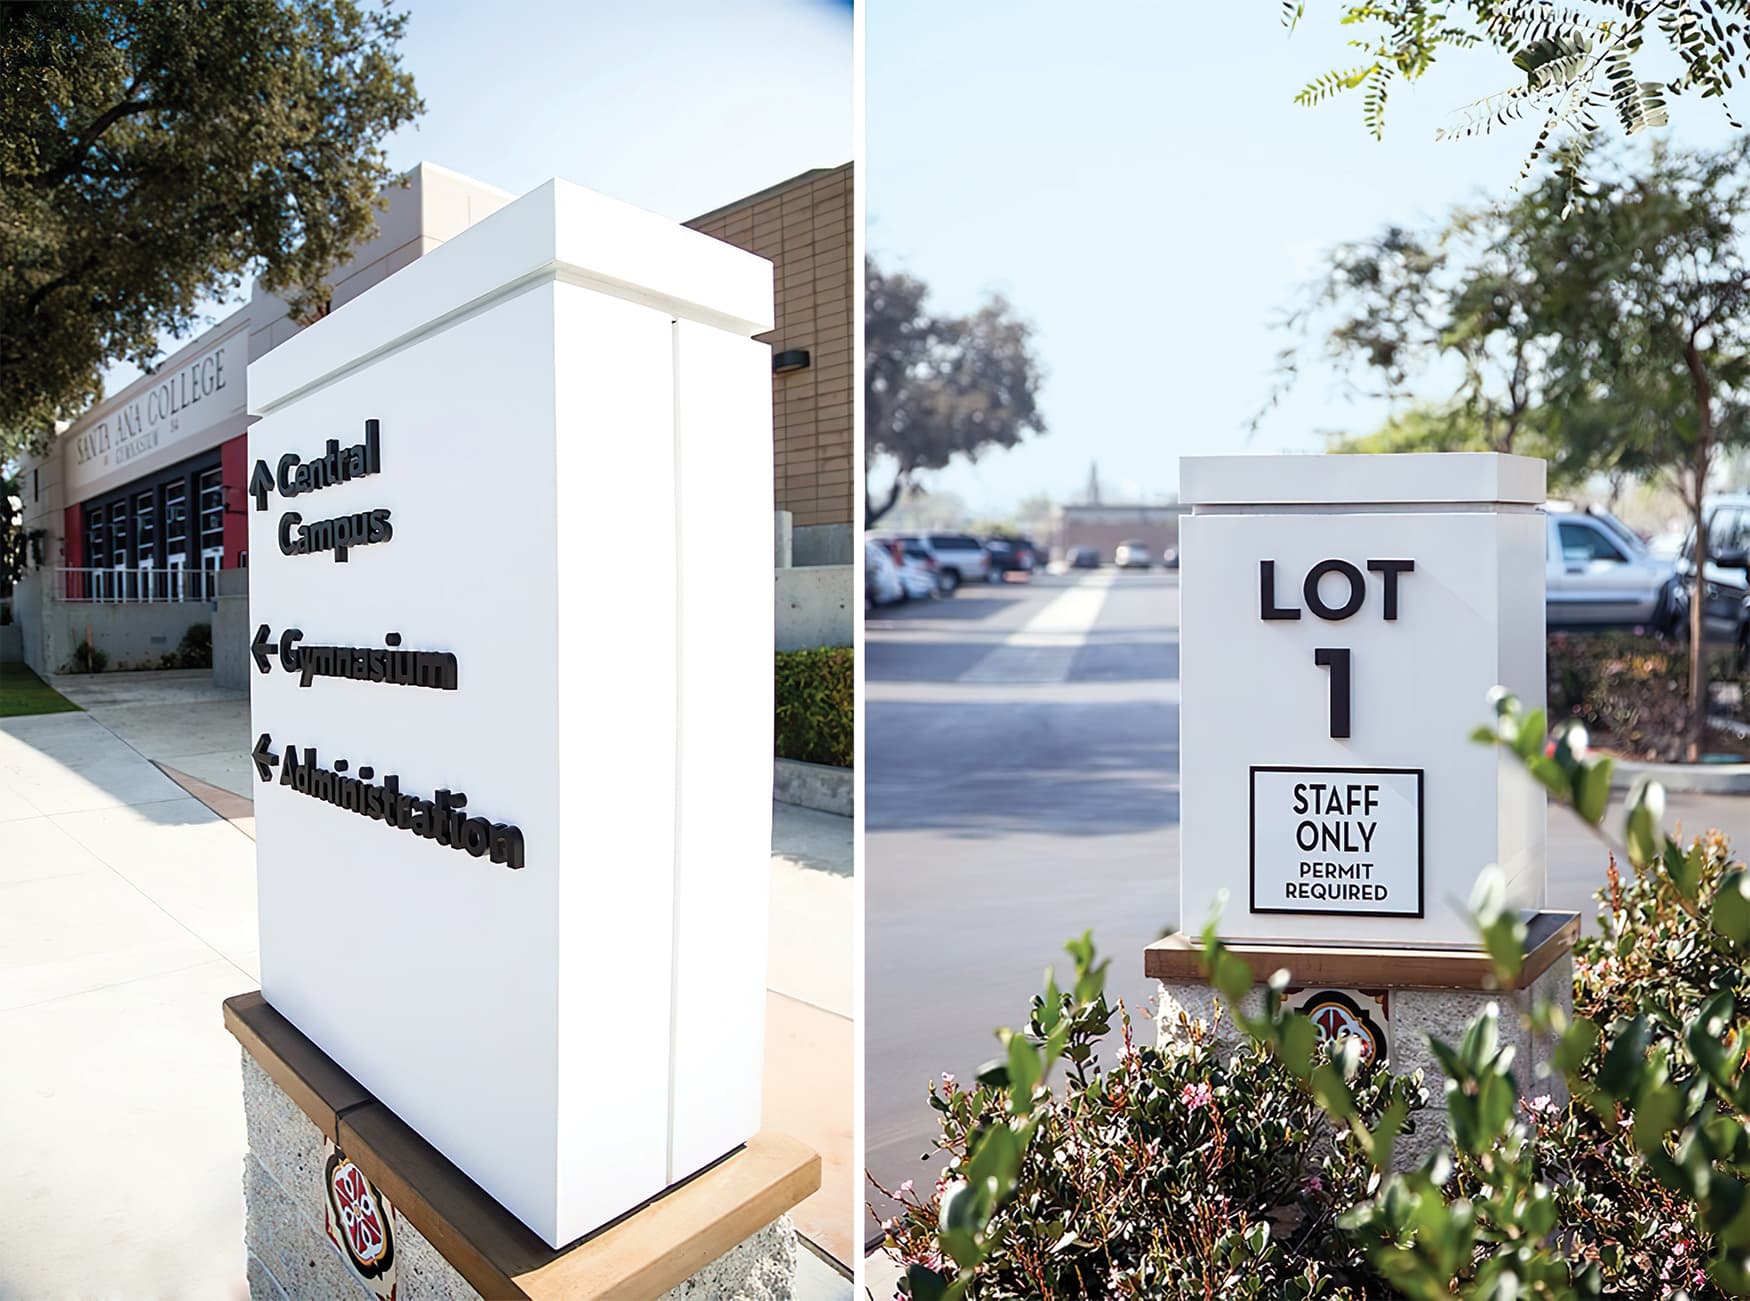 RSM Design worked with Santa Ana College to create a wayfinding system and public art system for the higher-education campus